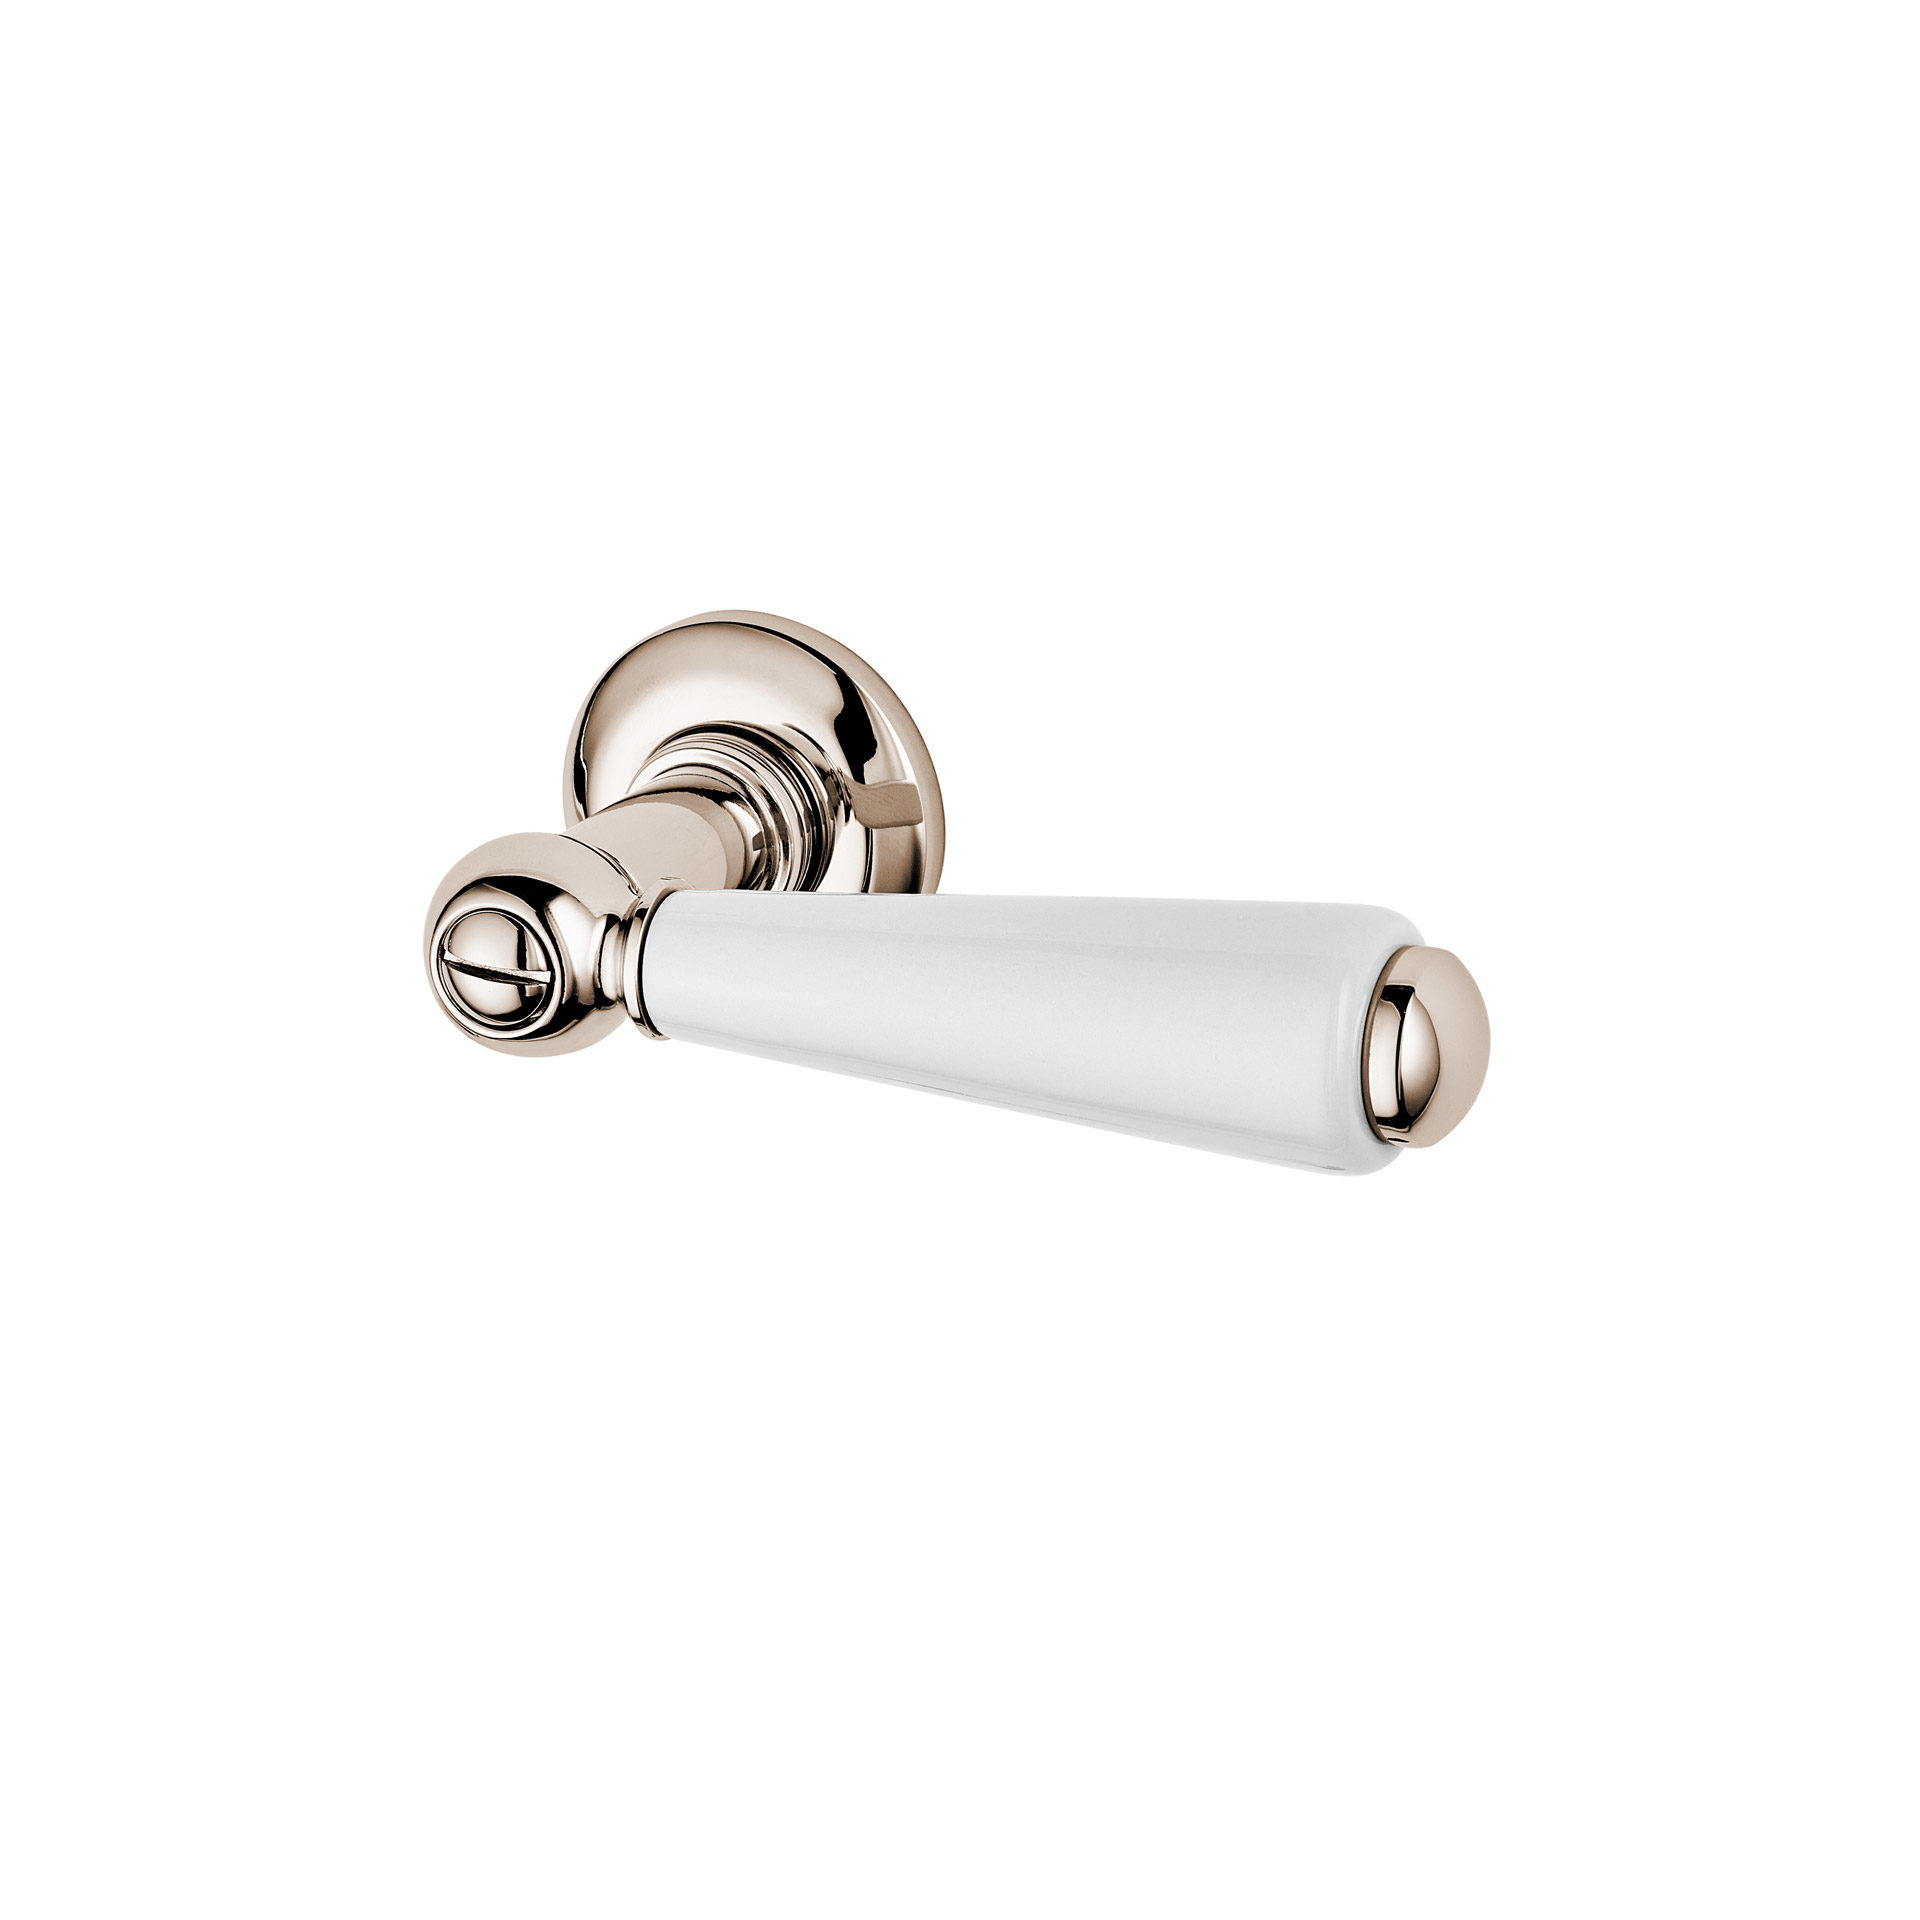 Regent cistern lever with white china handle